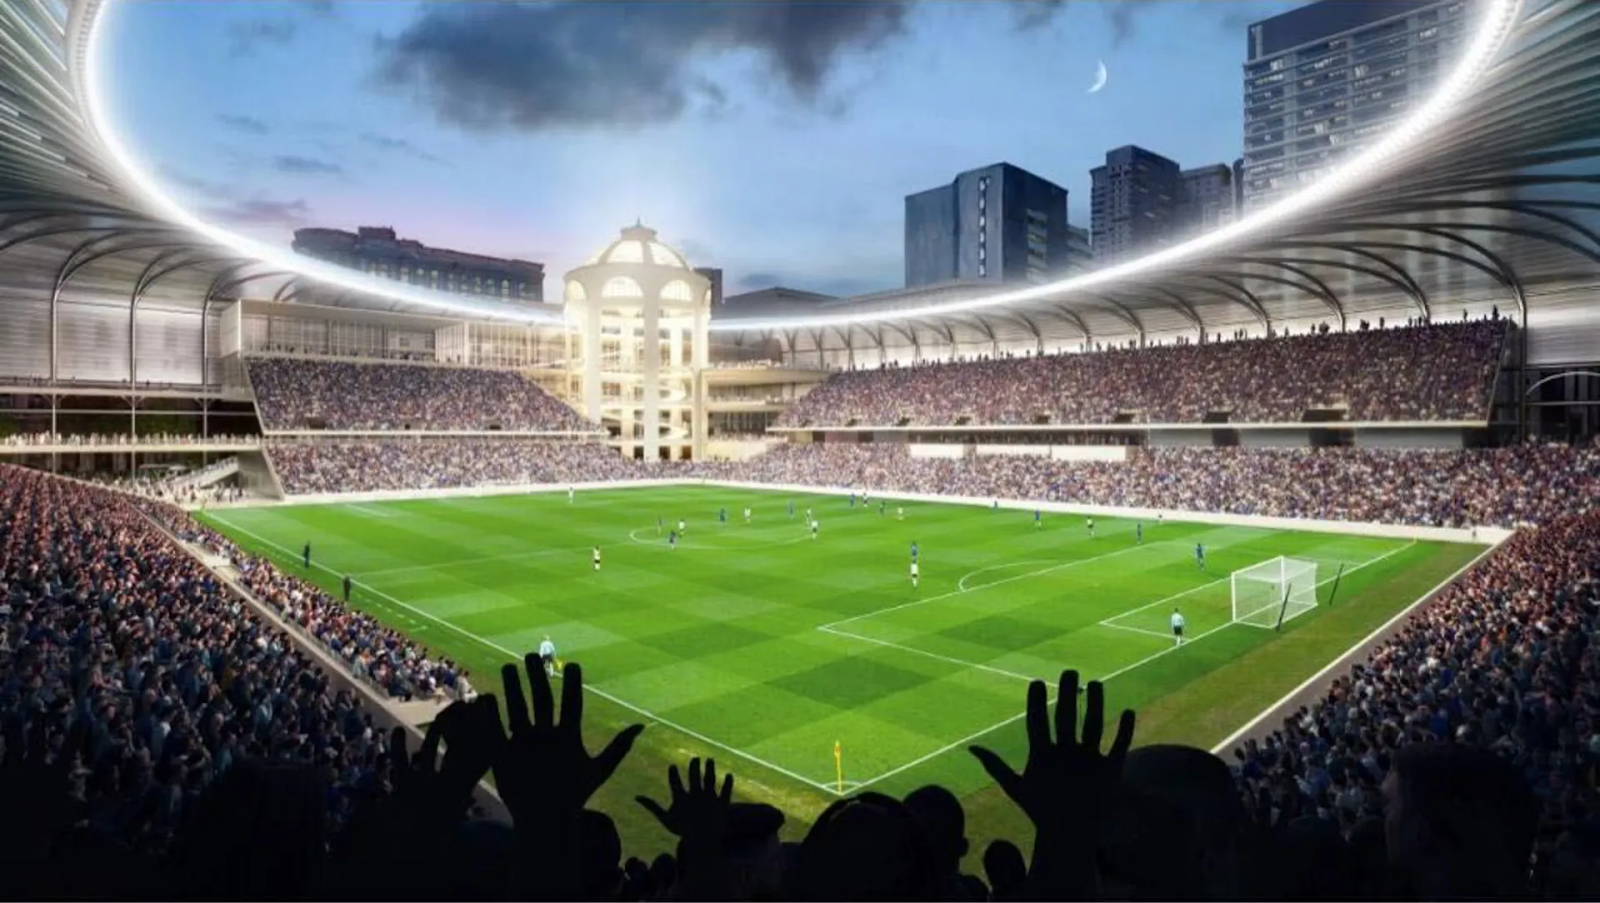 A rendering of a suggested MLS stadium in downtown San Francisco replacing the DownTown Mall